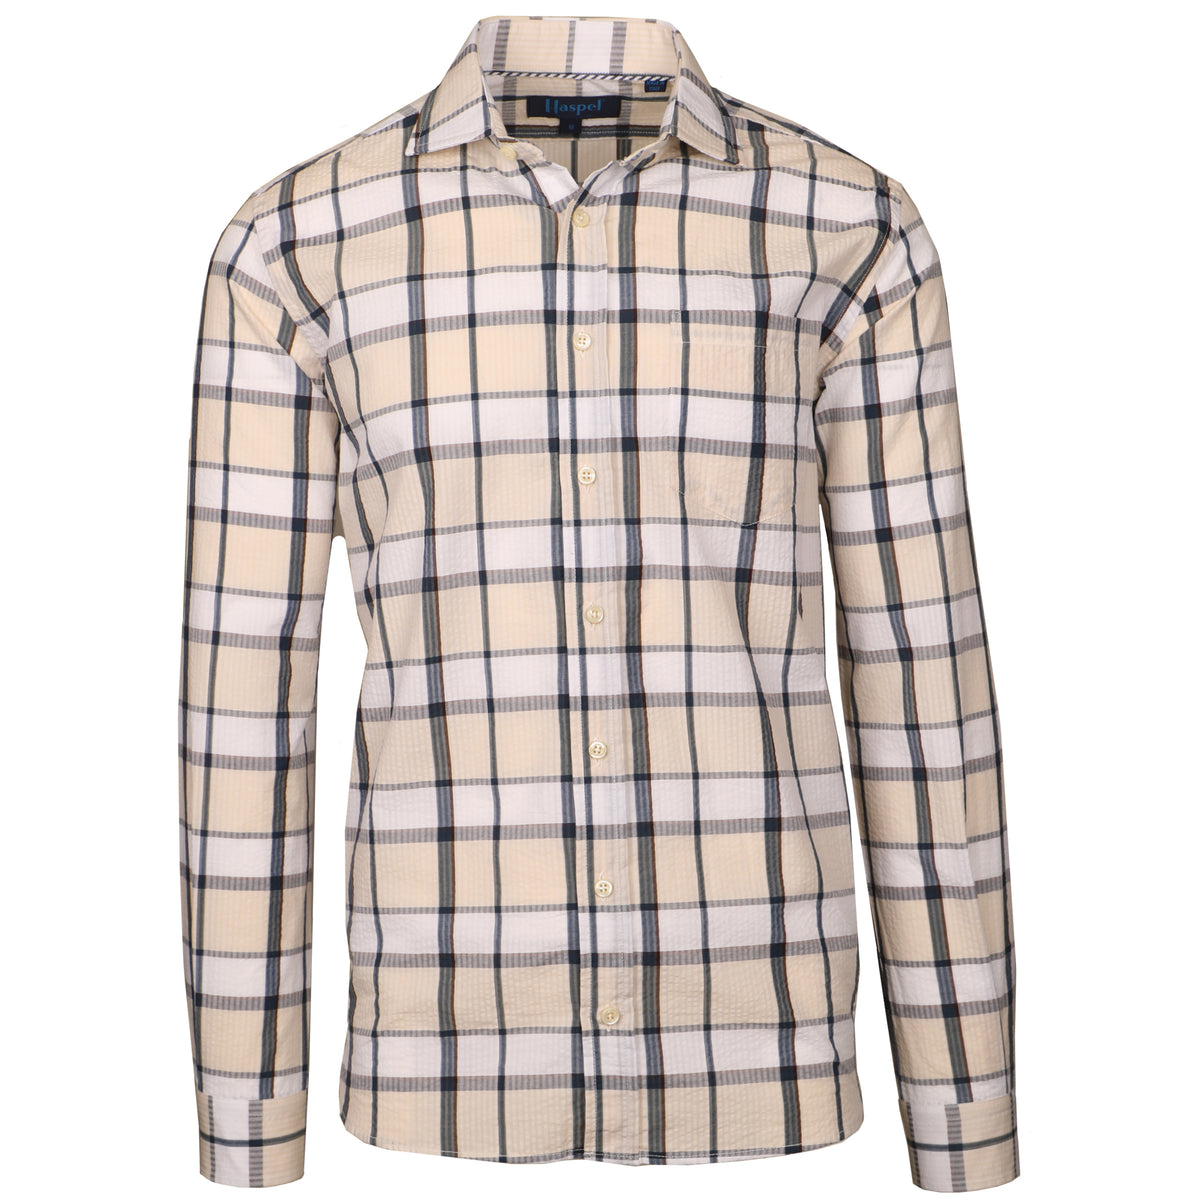 Seersucker like you&#39;ve never seen seersucker before. Tan and white wide plaid on our signature lightweight seersucker long sleeve button up.   100% Cotton Seersucker  •  Spread Collar  •  Long Sleeve  •  Chest Pocket  •  Machine Washable  •  Made in Italy  •  Return Policy